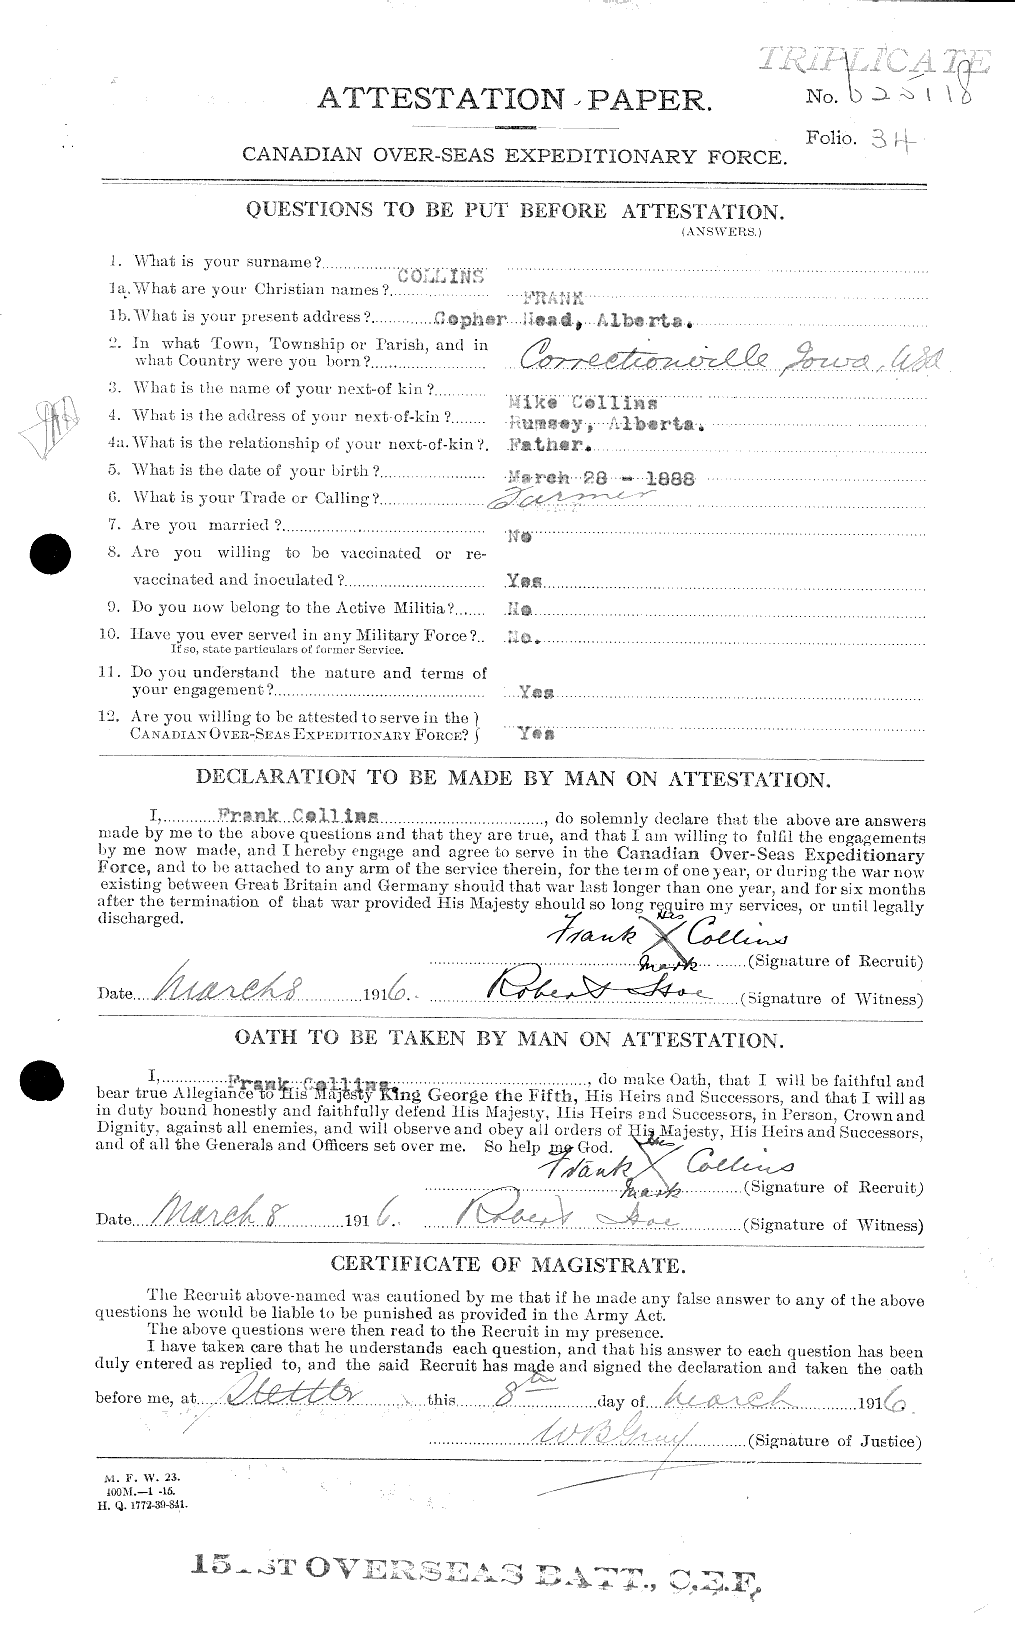 Personnel Records of the First World War - CEF 037790a